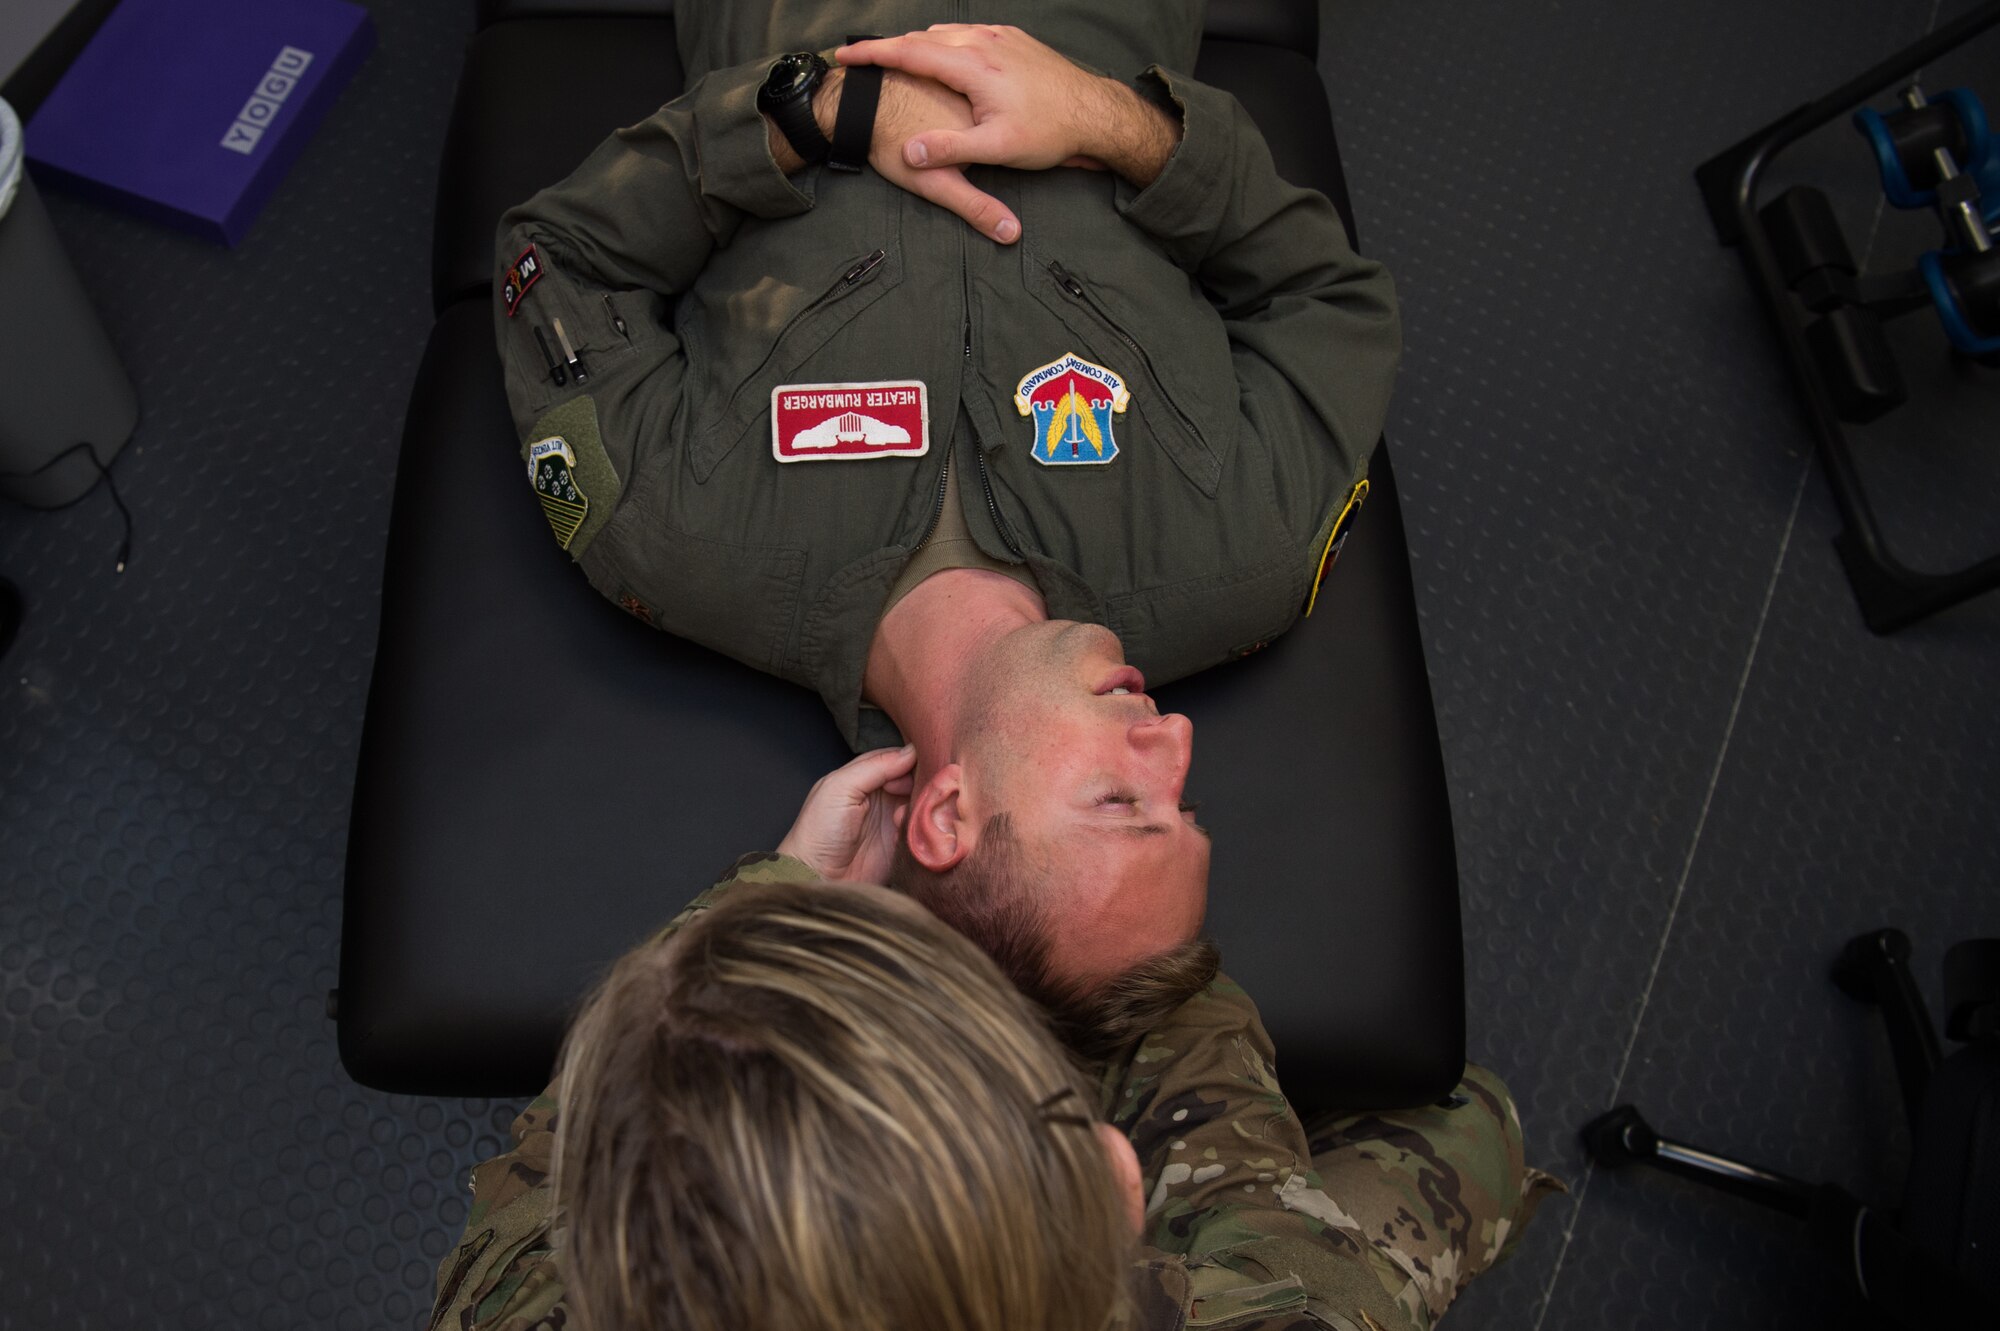 U.S. Air Force Capt. Michelle Jilek, 633rd Medical Operations Squadron physical therapist, examines Maj. Seth Rumbarger, 71st Fighter Squadron T-38 Talon pilot, at Joint Base Langley Eustis, Virginia, Nov. 13, 2019.